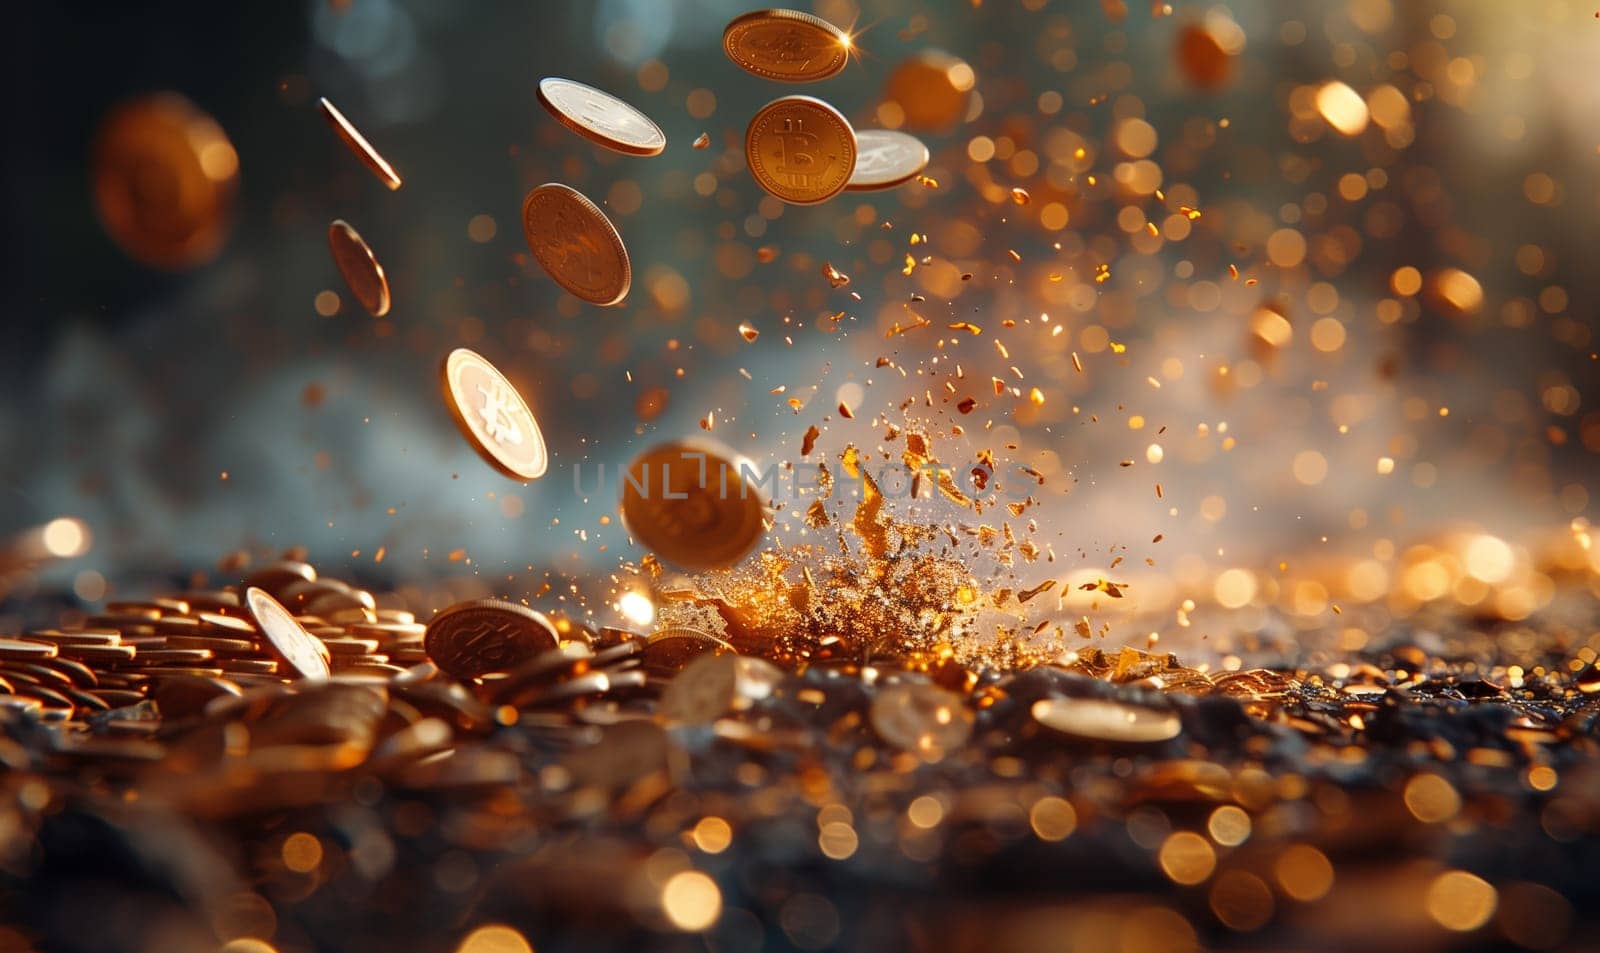 Bitcoin gold coins in dynamic movement. Selective focus